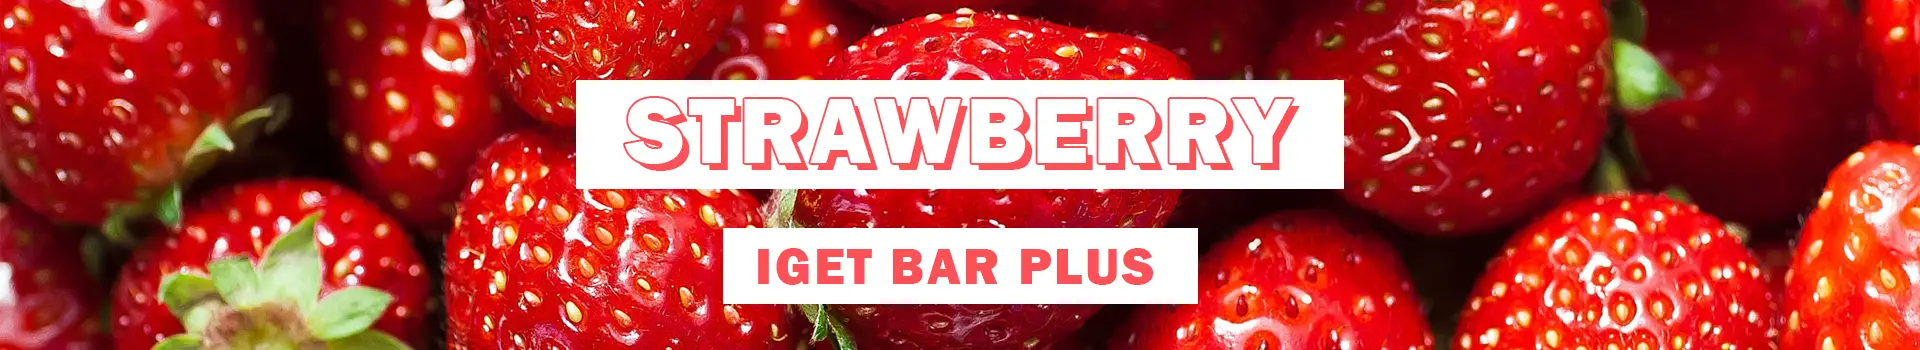 strawberry iget bar plus flavours